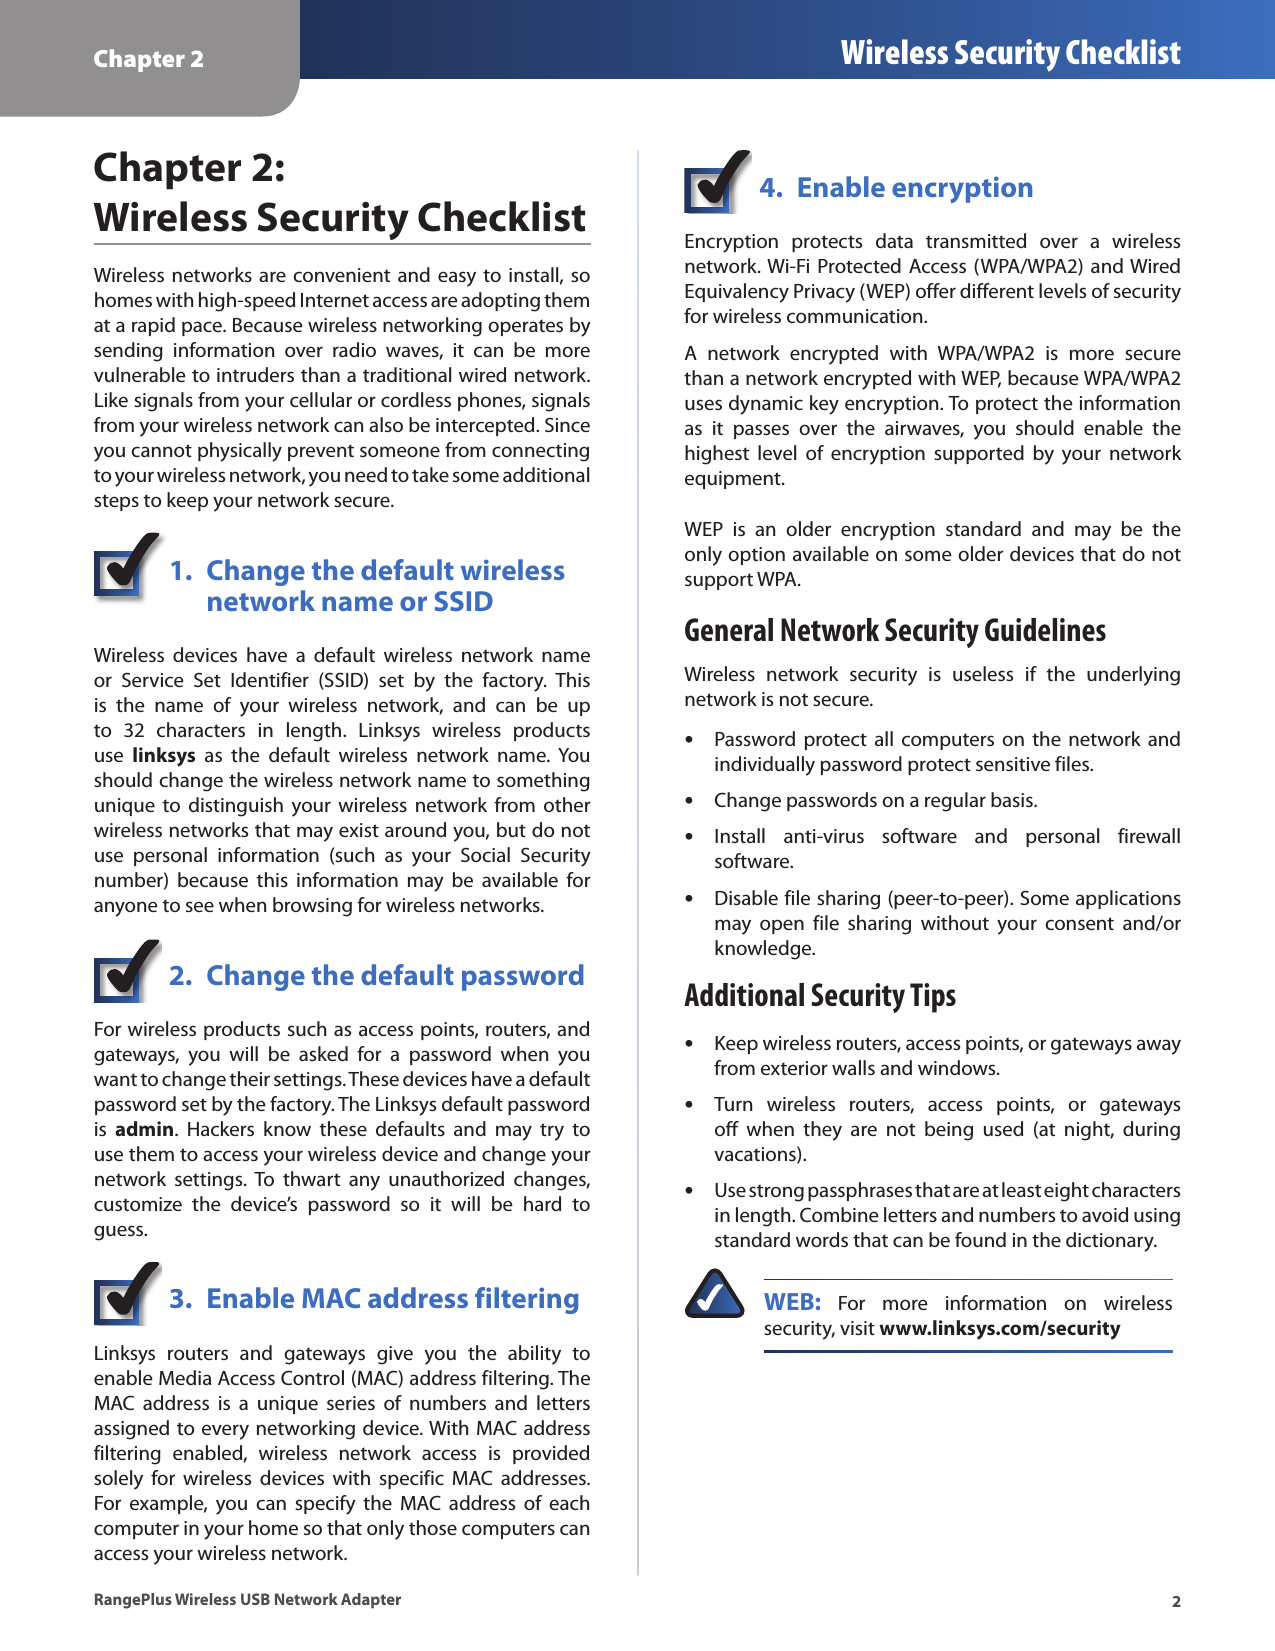 Chapter 2 Wireless Security Checklist2RangePlus Wireless USB Network AdapterChapter 2:  Wireless Security ChecklistWireless  networks are convenient  and  easy to install, so homes with high-speed Internet access are adopting them at a rapid pace. Because wireless networking operates by sending  information  over  radio  waves,  it  can  be  more vulnerable to intruders than a traditional wired network. Like signals from your cellular or cordless phones, signals from your wireless network can also be intercepted. Since you cannot physically prevent someone from connecting to your wireless network, you need to take some additional steps to keep your network secure. 1.  Change the default wireless    network name or SSIDWireless  devices  have  a  default  wireless  network  name or  Service  Set  Identifier  (SSID)  set  by  the  factory.  This is  the  name  of  your  wireless  network,  and  can  be  up to  32  characters  in  length.  Linksys  wireless  products use  linksys  as  the  default  wireless  network  name.  You should change the wireless network name to something unique  to distinguish  your wireless  network from  other wireless networks that may exist around you, but do not use  personal  information  (such  as  your  Social  Security number)  because  this  information  may  be  available  for anyone to see when browsing for wireless networks. 2.  Change the default passwordFor wireless products such as access points, routers, and gateways,  you  will  be  asked  for  a  password  when  you want to change their settings. These devices have a default password set by the factory. The Linksys default password is  admin.  Hackers  know  these  defaults  and  may  try  to use them to access your wireless device and change your network  settings. To  thwart  any  unauthorized  changes, customize  the  device’s  password  so  it  will  be  hard  to guess.3.  Enable MAC address filteringLinksys  routers  and  gateways  give  you  the  ability  to enable Media Access Control (MAC) address filtering. The MAC  address  is  a  unique  series  of  numbers  and  letters assigned to every networking device. With MAC address filtering  enabled,  wireless  network  access  is  provided solely  for  wireless  devices  with  specific  MAC  addresses. For  example,  you  can  specify  the  MAC  address  of  each computer in your home so that only those computers can access your wireless network. 4.  Enable encryptionEncryption  protects  data  transmitted  over  a  wireless network. Wi-Fi Protected  Access (WPA/WPA2)  and Wired Equivalency Privacy (WEP) offer different levels of security for wireless communication.A  network  encrypted  with  WPA/WPA2  is  more  secure than a network encrypted with WEP, because WPA/WPA2 uses dynamic key encryption. To protect the information as  it  passes  over  the  airwaves,  you  should  enable  the highest  level  of  encryption  supported  by  your  network equipment. WEP  is  an  older  encryption  standard  and  may  be  the only option available on some older devices that do not support WPA.General Network Security GuidelinesWireless  network  security  is  useless  if  the  underlying network is not secure. Password protect  all computers on  the network  and  •individually password protect sensitive files.Change passwords on a regular basis. •Install  anti-virus  software  and  personal  firewall  •software.Disable file sharing (peer-to-peer). Some applications  •may  open  file  sharing  without  your  consent  and/or knowledge.Additional Security TipsKeep wireless routers, access points, or gateways away  •from exterior walls and windows.Turn  wireless  routers,  access  points,  or  gateways  •off  when  they  are  not  being  used  (at  night,  during vacations).Use strong passphrases that are at least eight characters  •in length. Combine letters and numbers to avoid using standard words that can be found in the dictionary. WEB:  For  more  information  on  wireless security, visit www.linksys.com/security